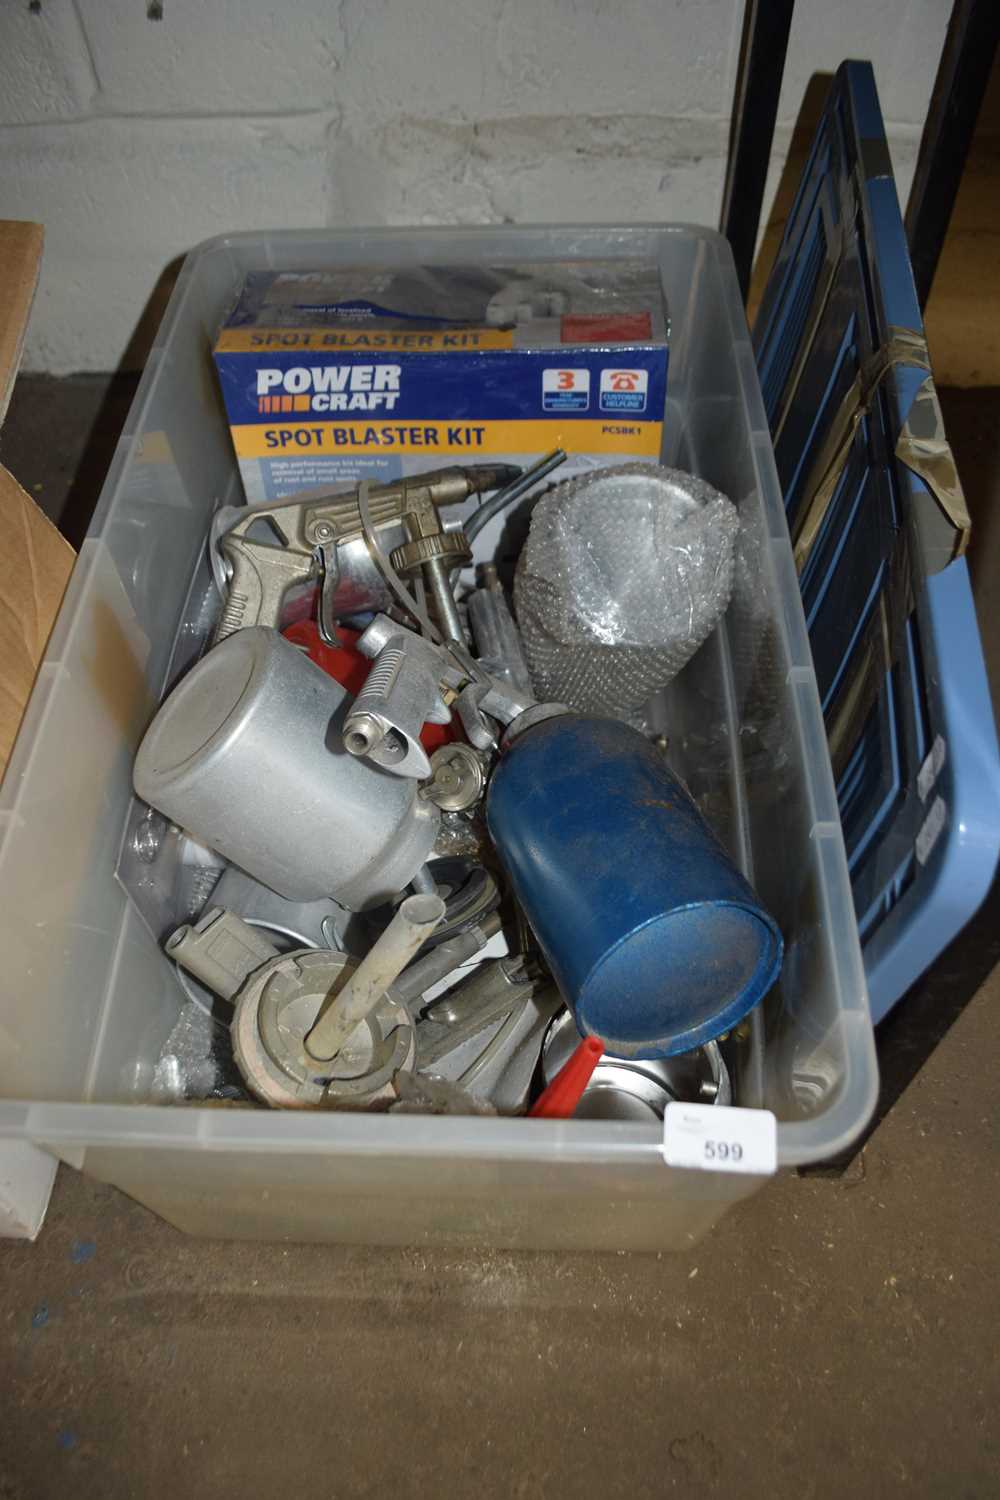 BOX OF VARIOUS SPRAY GUNS, SPOT BLASTER KIT AND OTHER ITEMS